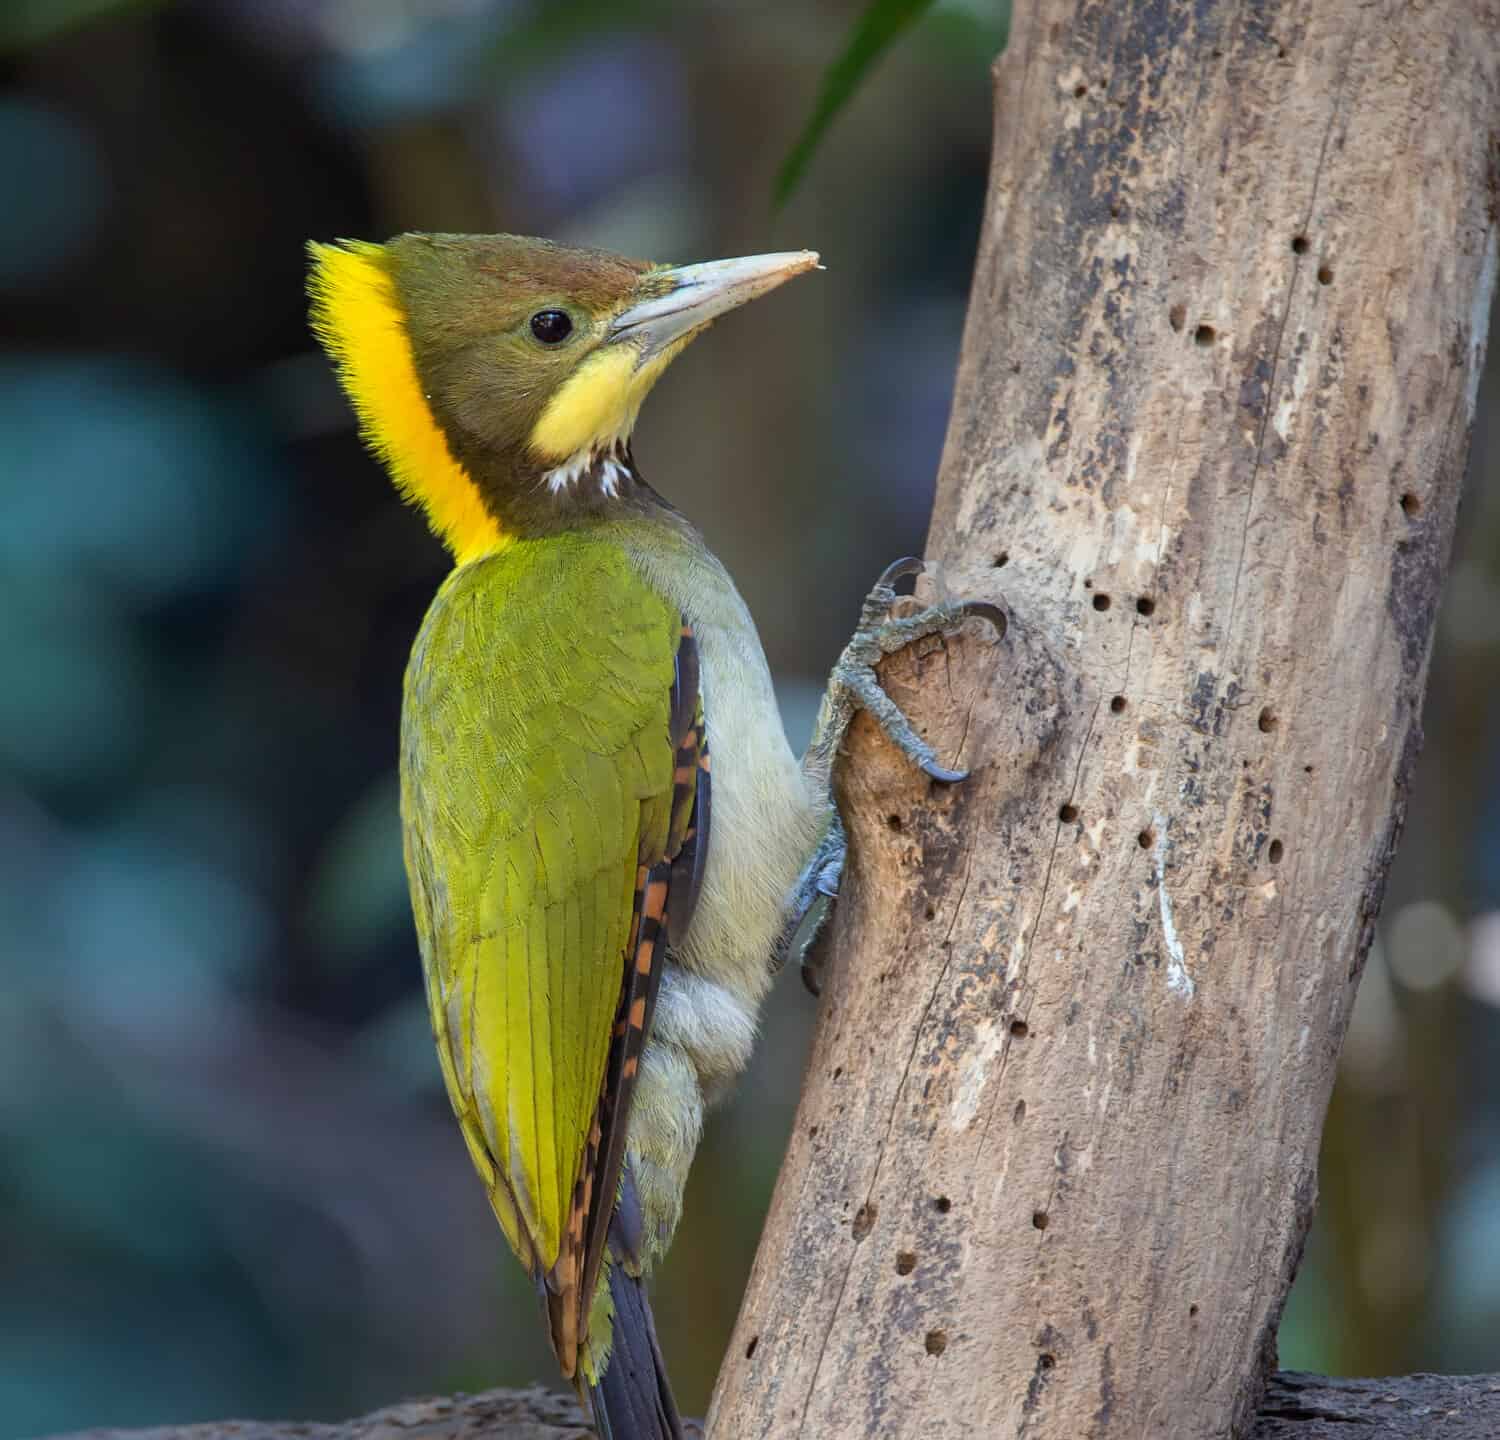 Greater Yellownape is a bird with a bright yellow to the nape of the crest, gray body, greenish-yellow back, yellow neck stripes and white with black spots. perching on a tree